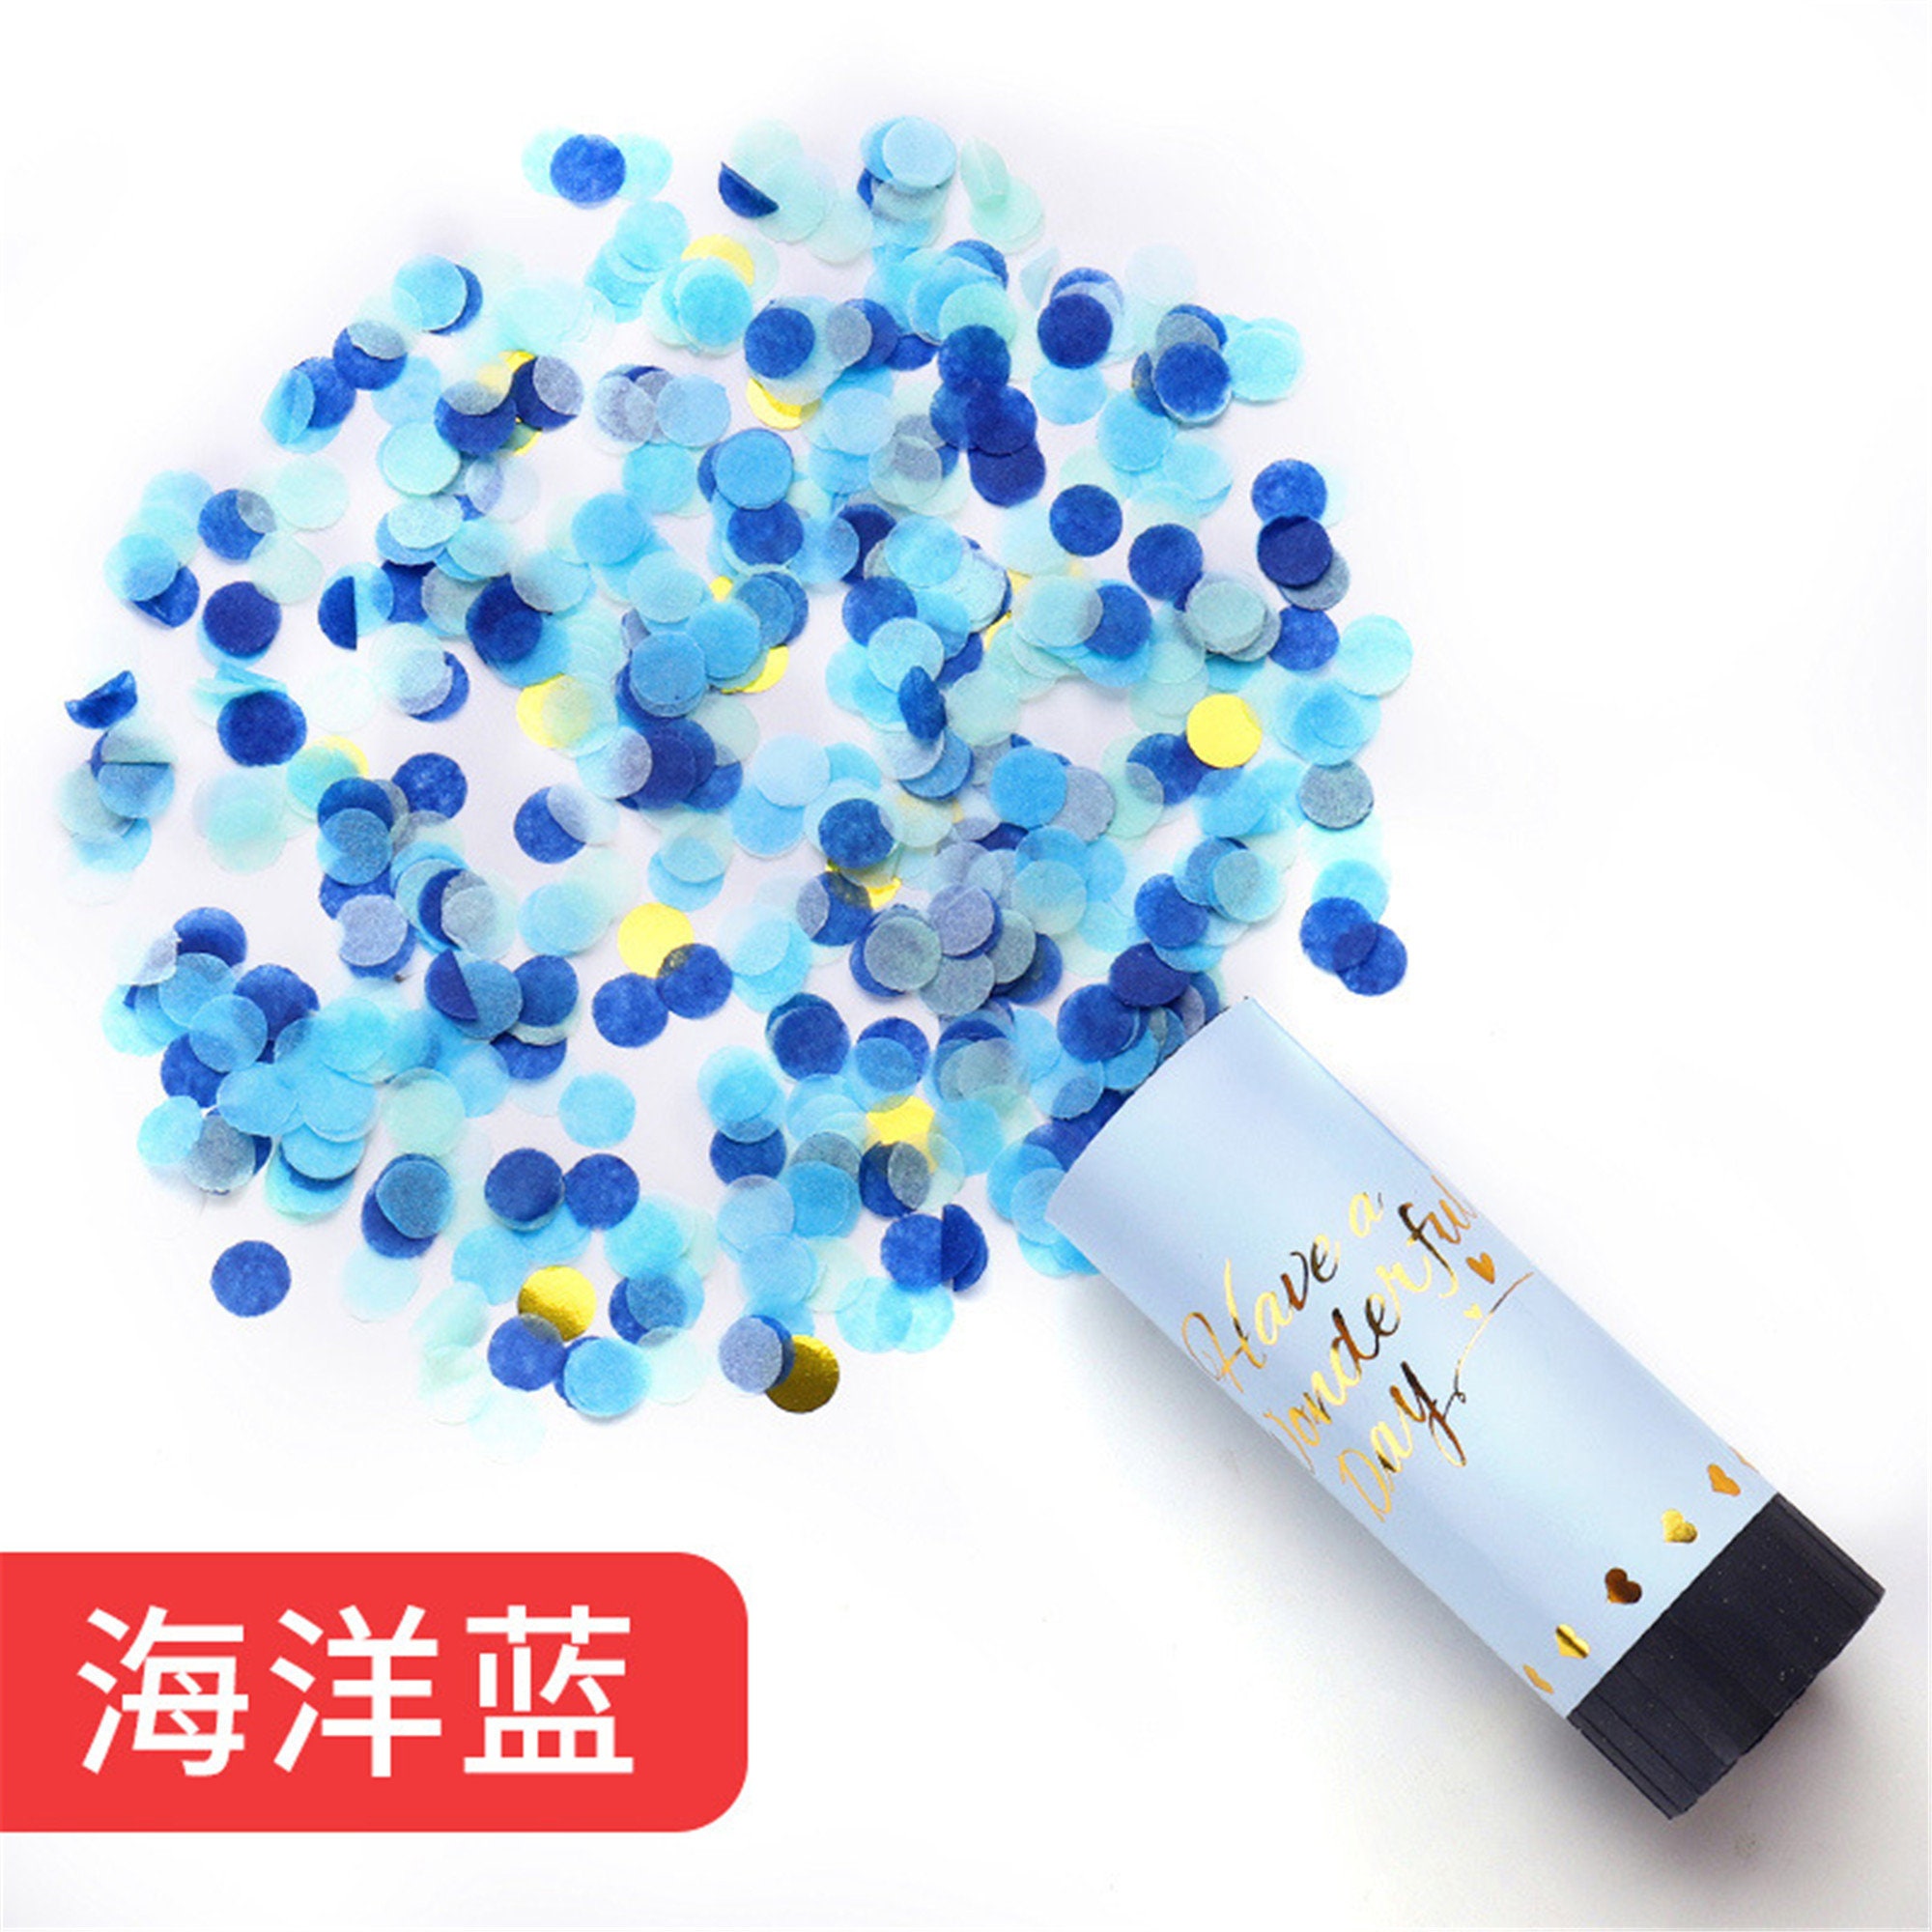 Mini Confetti Cannon With Spring Activated-wedding Confetti Poppers-push  Pop Confetti Making Your Party Extra Special 